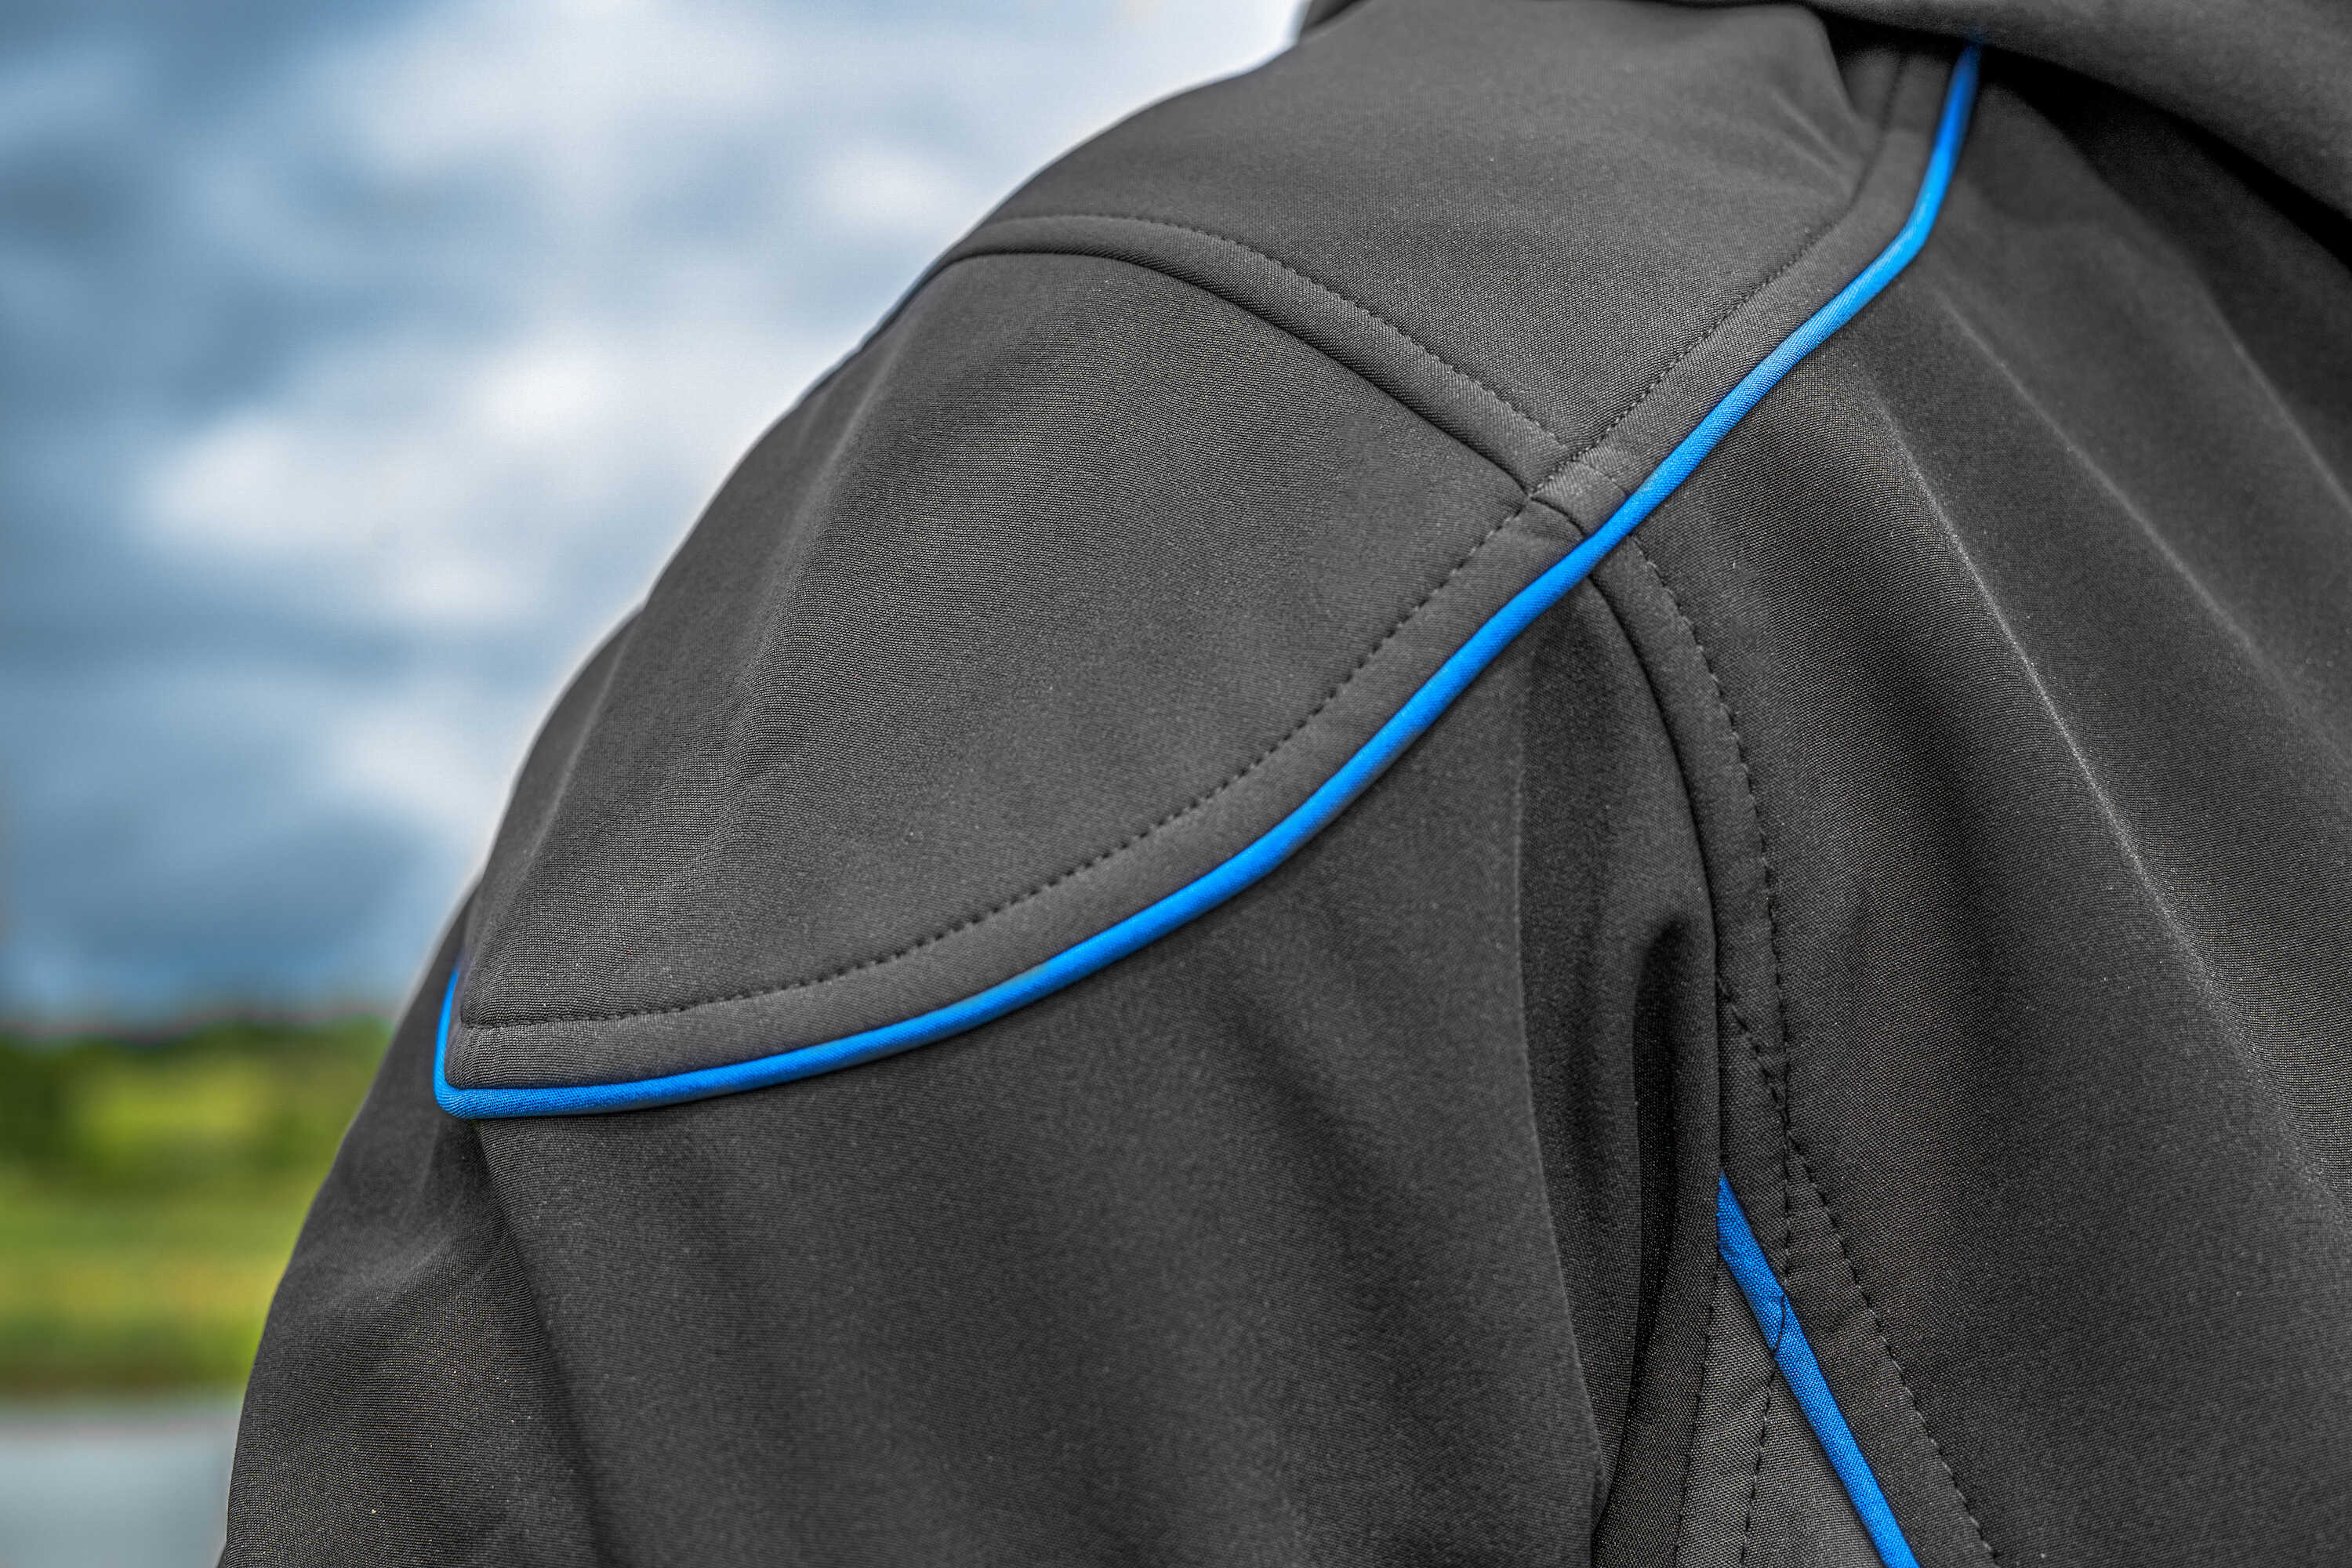 Preston Thermatech Heated Softshell Jacket (Inc. Electric Heating!)